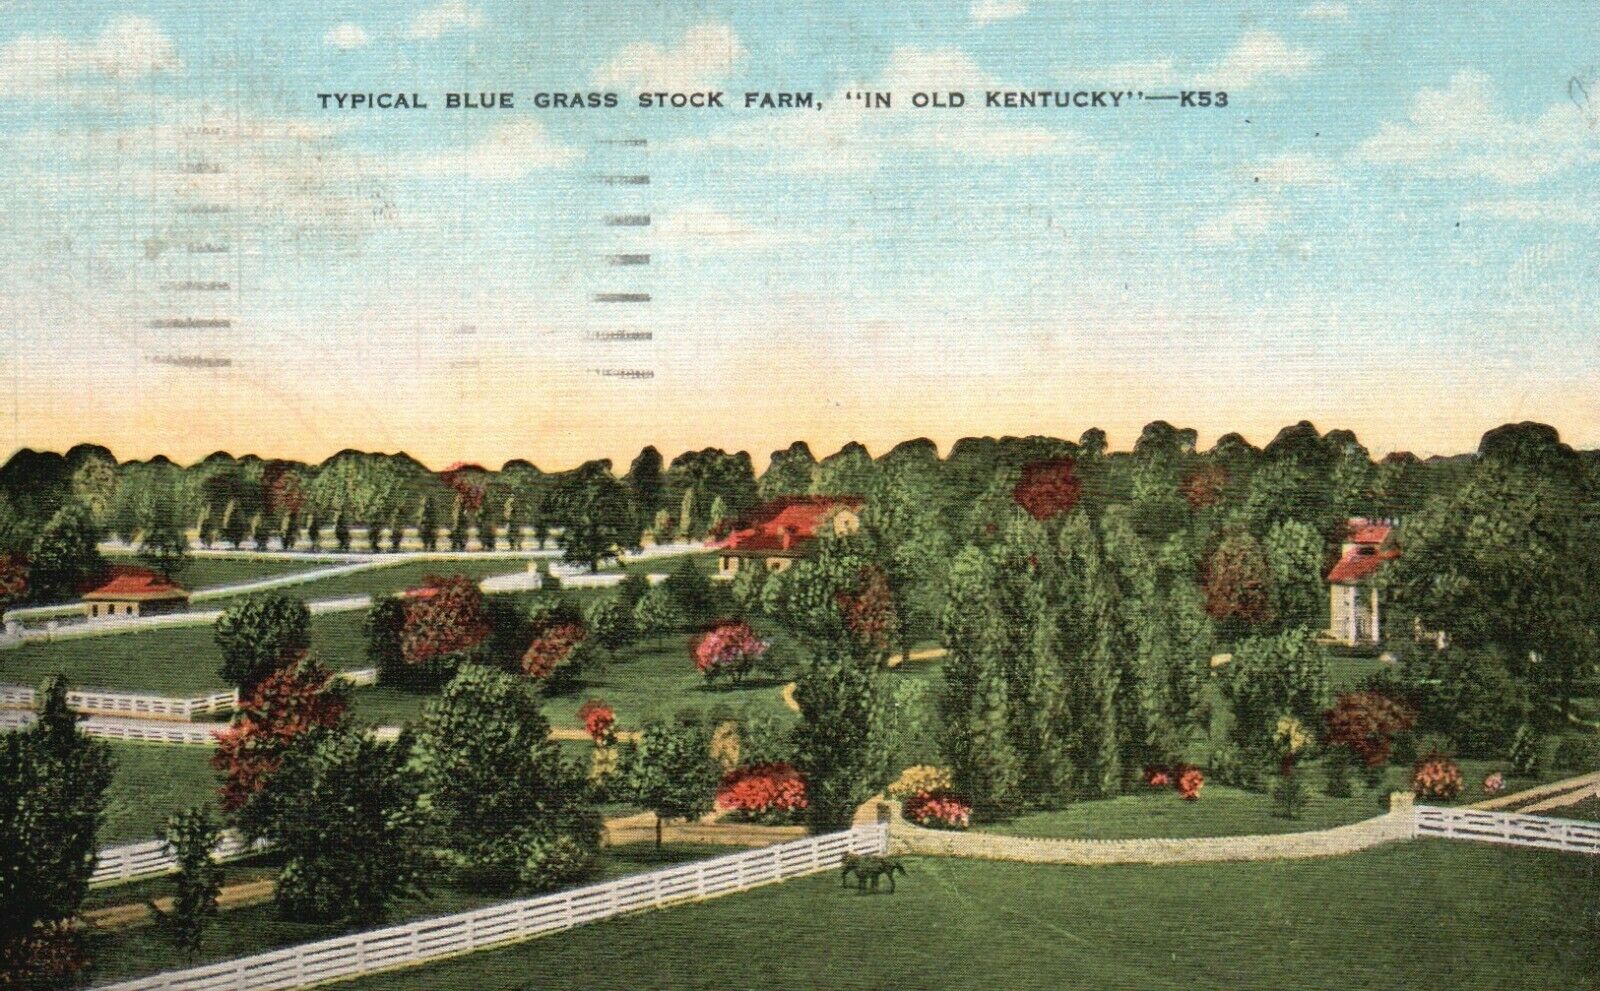 Typical Blue Grass Stock Farm "in Old Kentucky", Ky, 1958 Vintage Postcard A4211